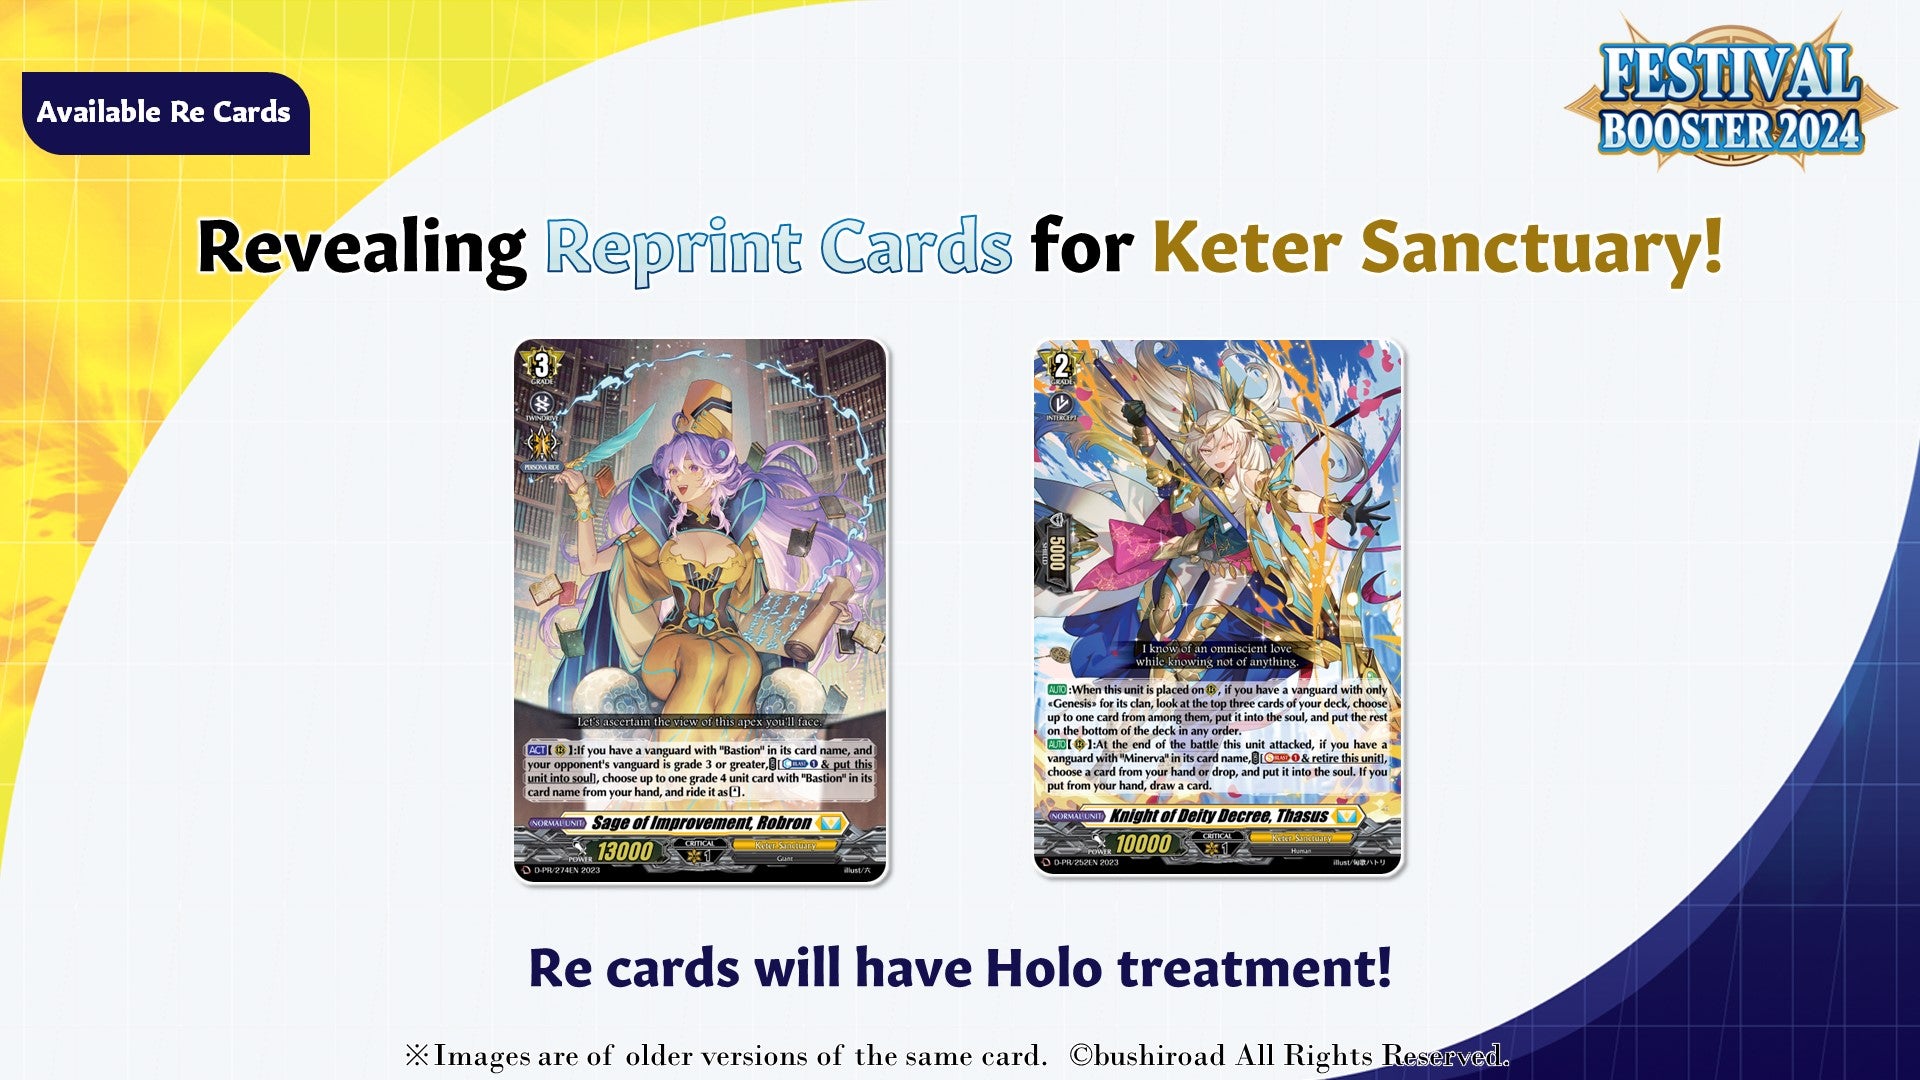 Cardfight!! Vanguard - Special Series: Festival Booster 2024 - Booster Pack